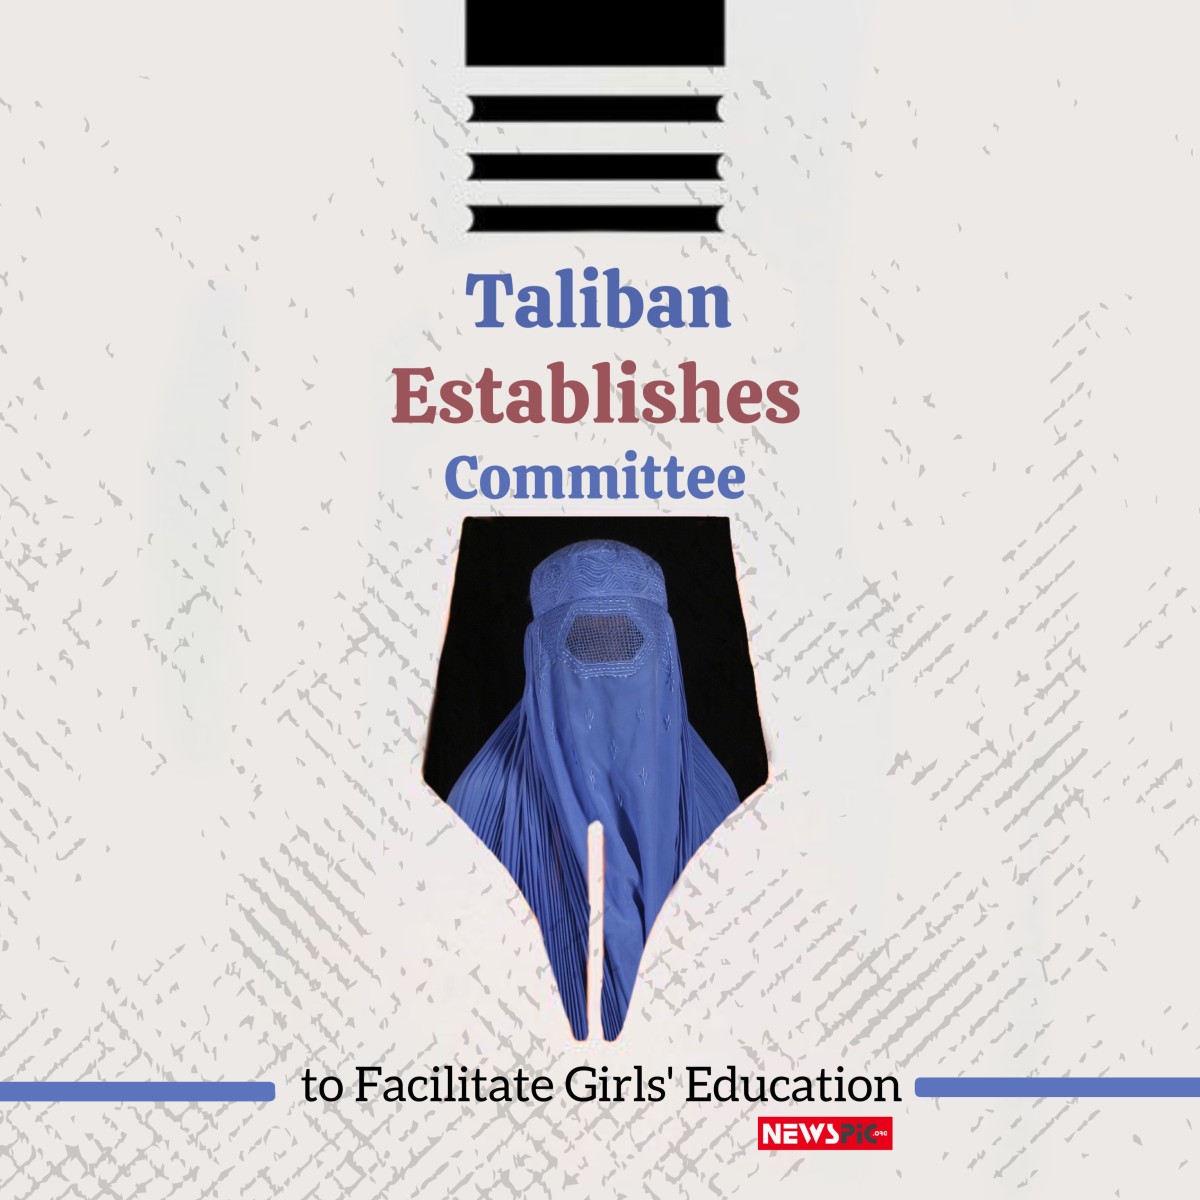 Taliban Establishes Committee to Facilitate Girls' Education